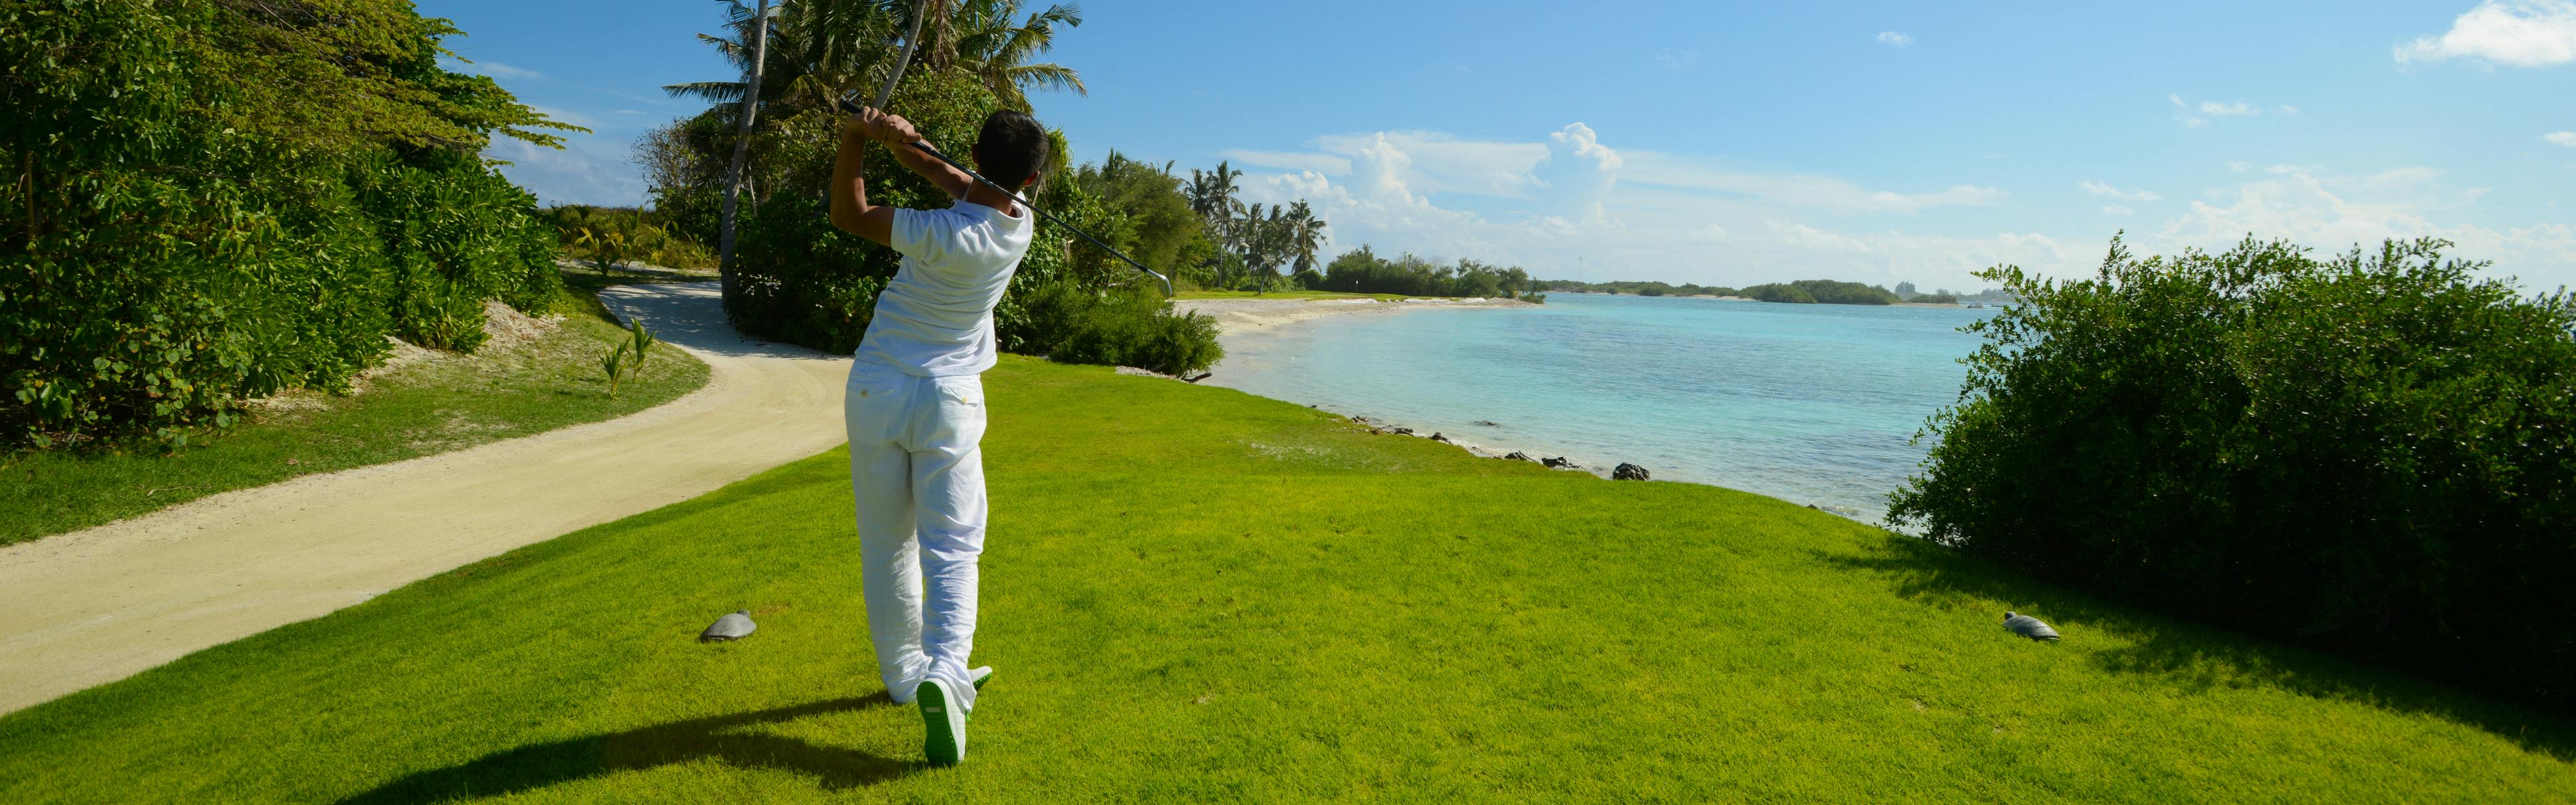 A man swings a golf club on a course next to tropical waters